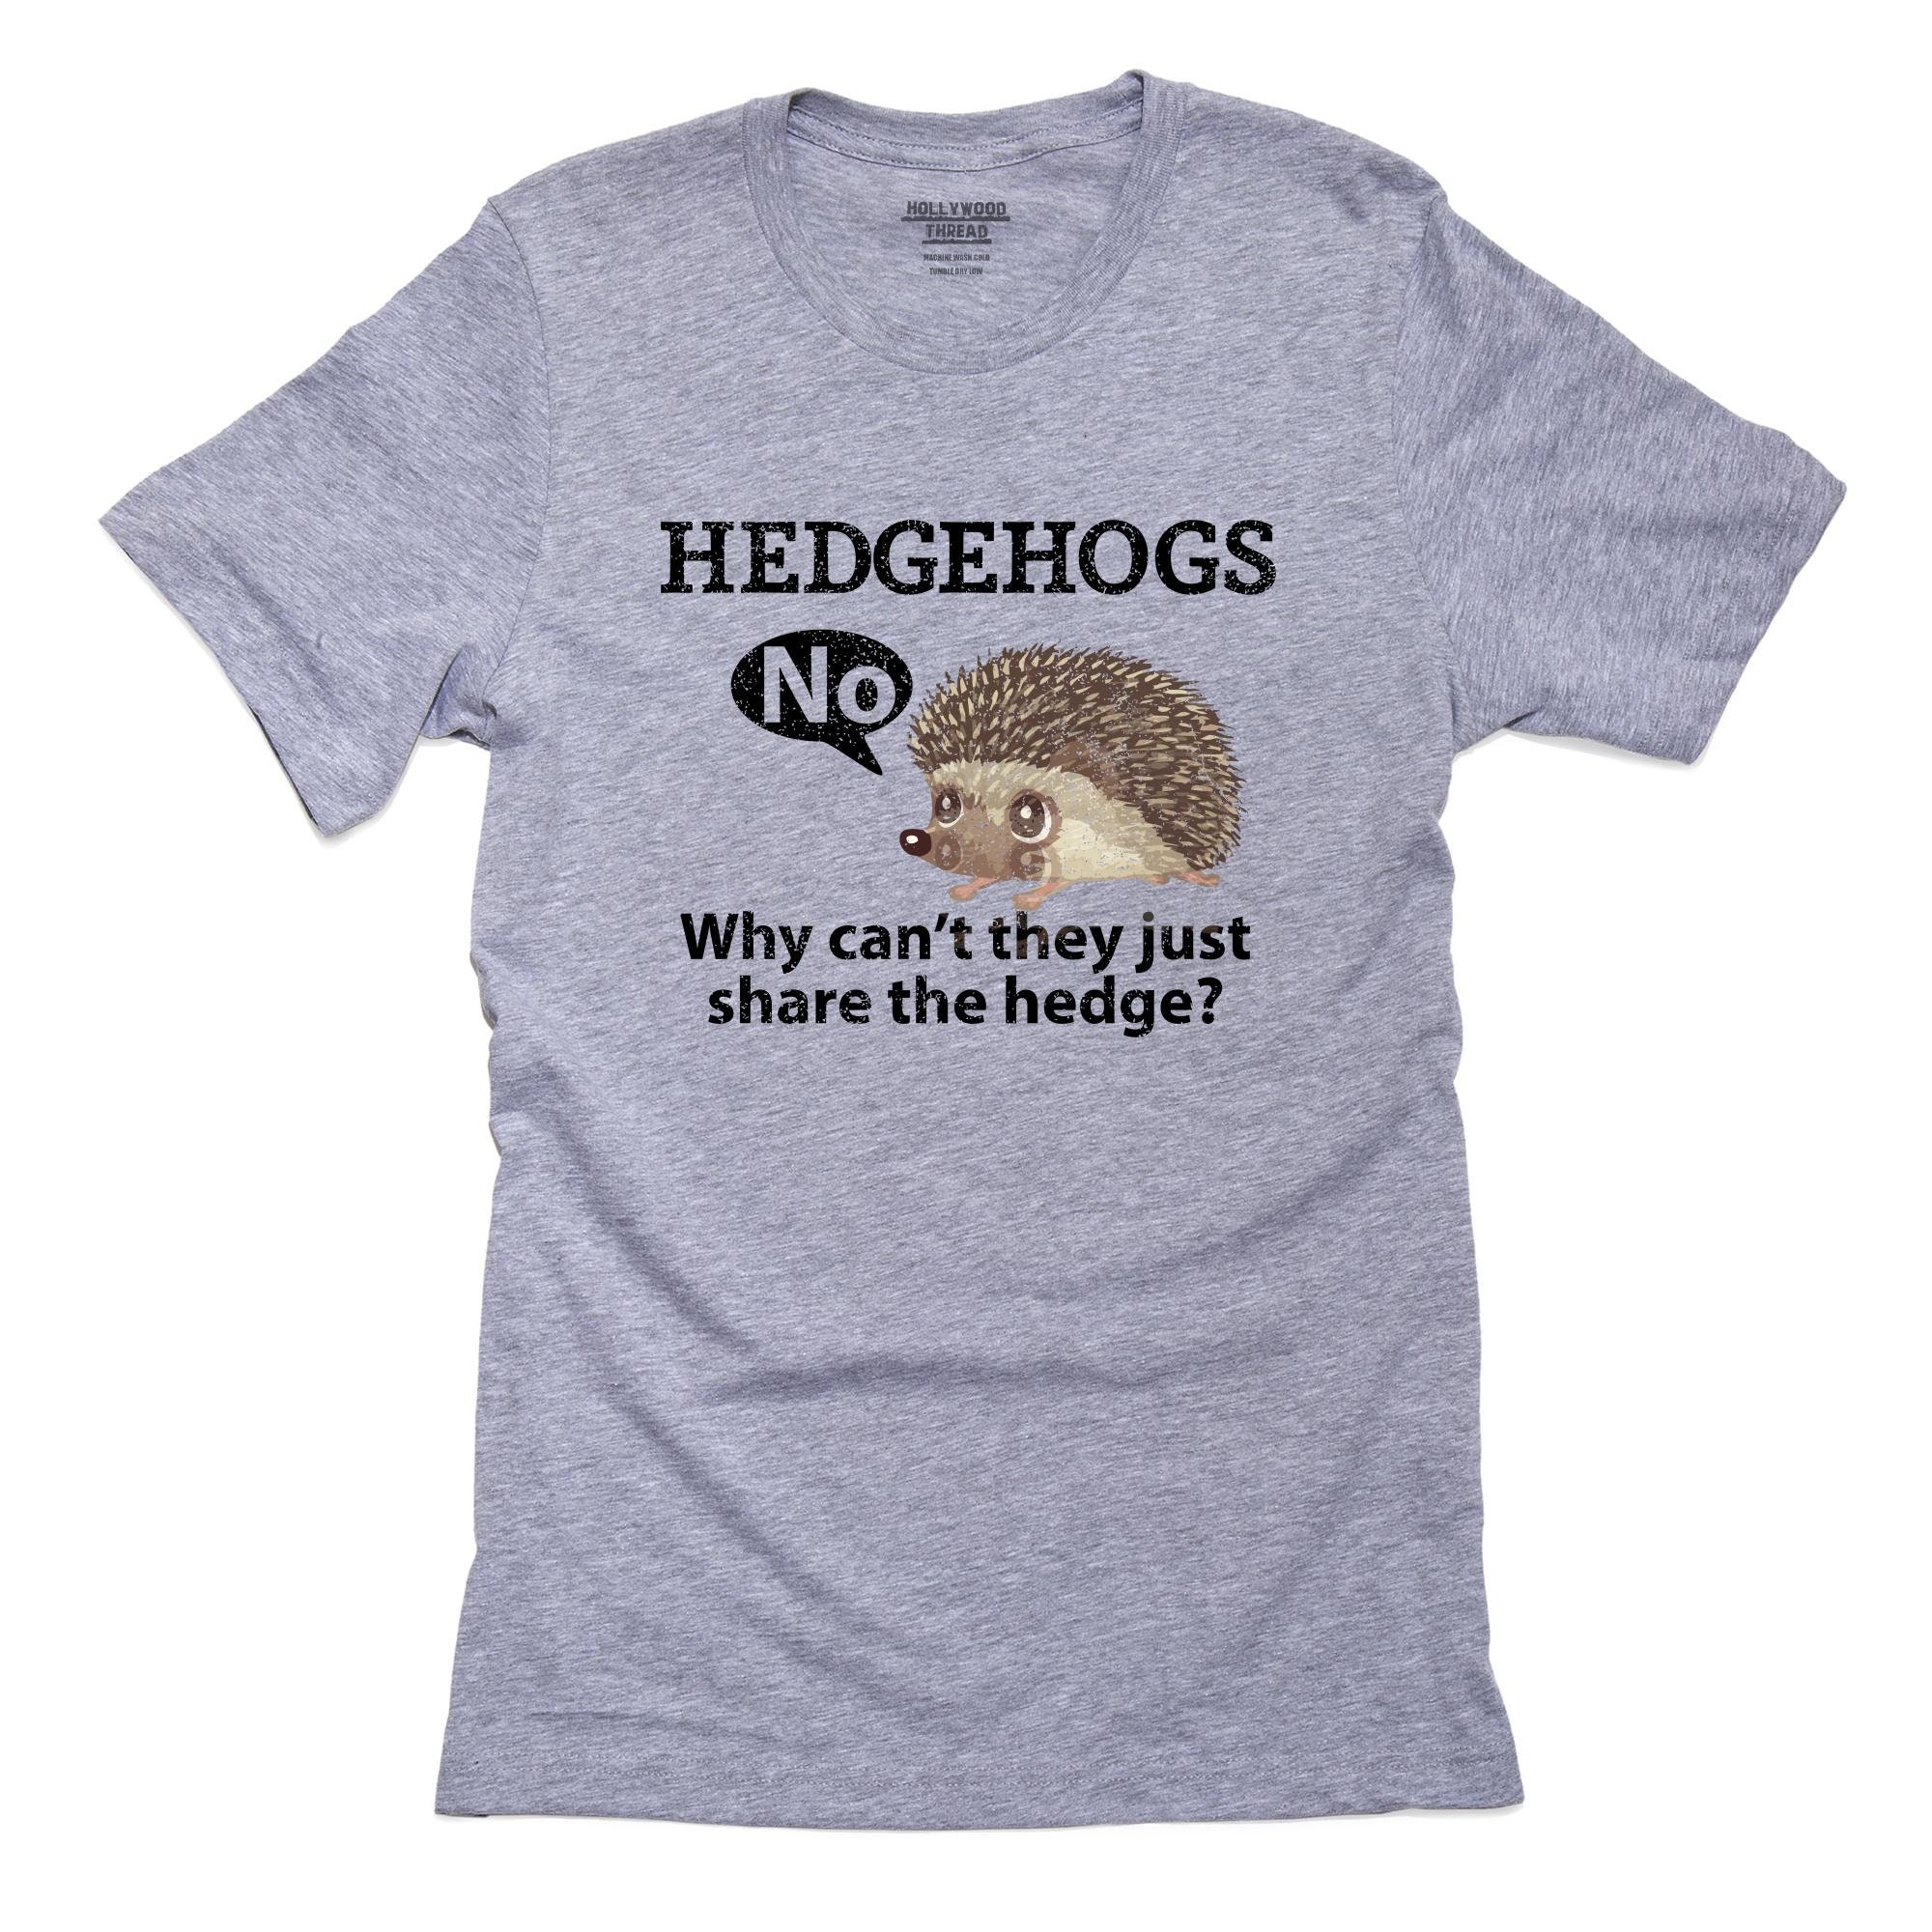 Hedgehogs Why Can't They Share the Hedge Funny Shirt | Etsy